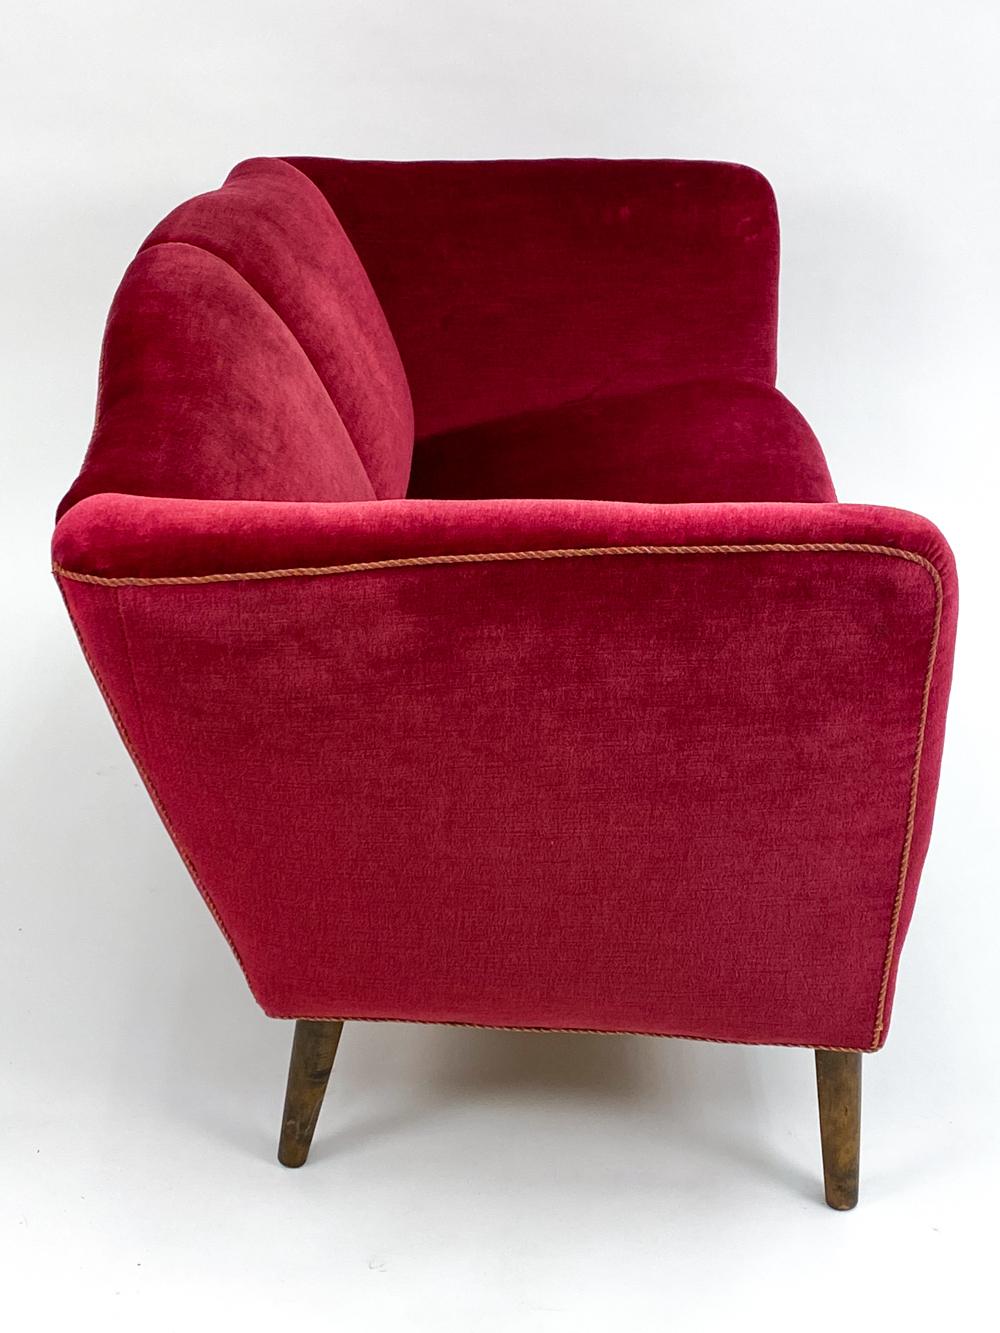 Swedish Mid-Century Beech & Red Mohair Sofa, c. 1950's For Sale 5